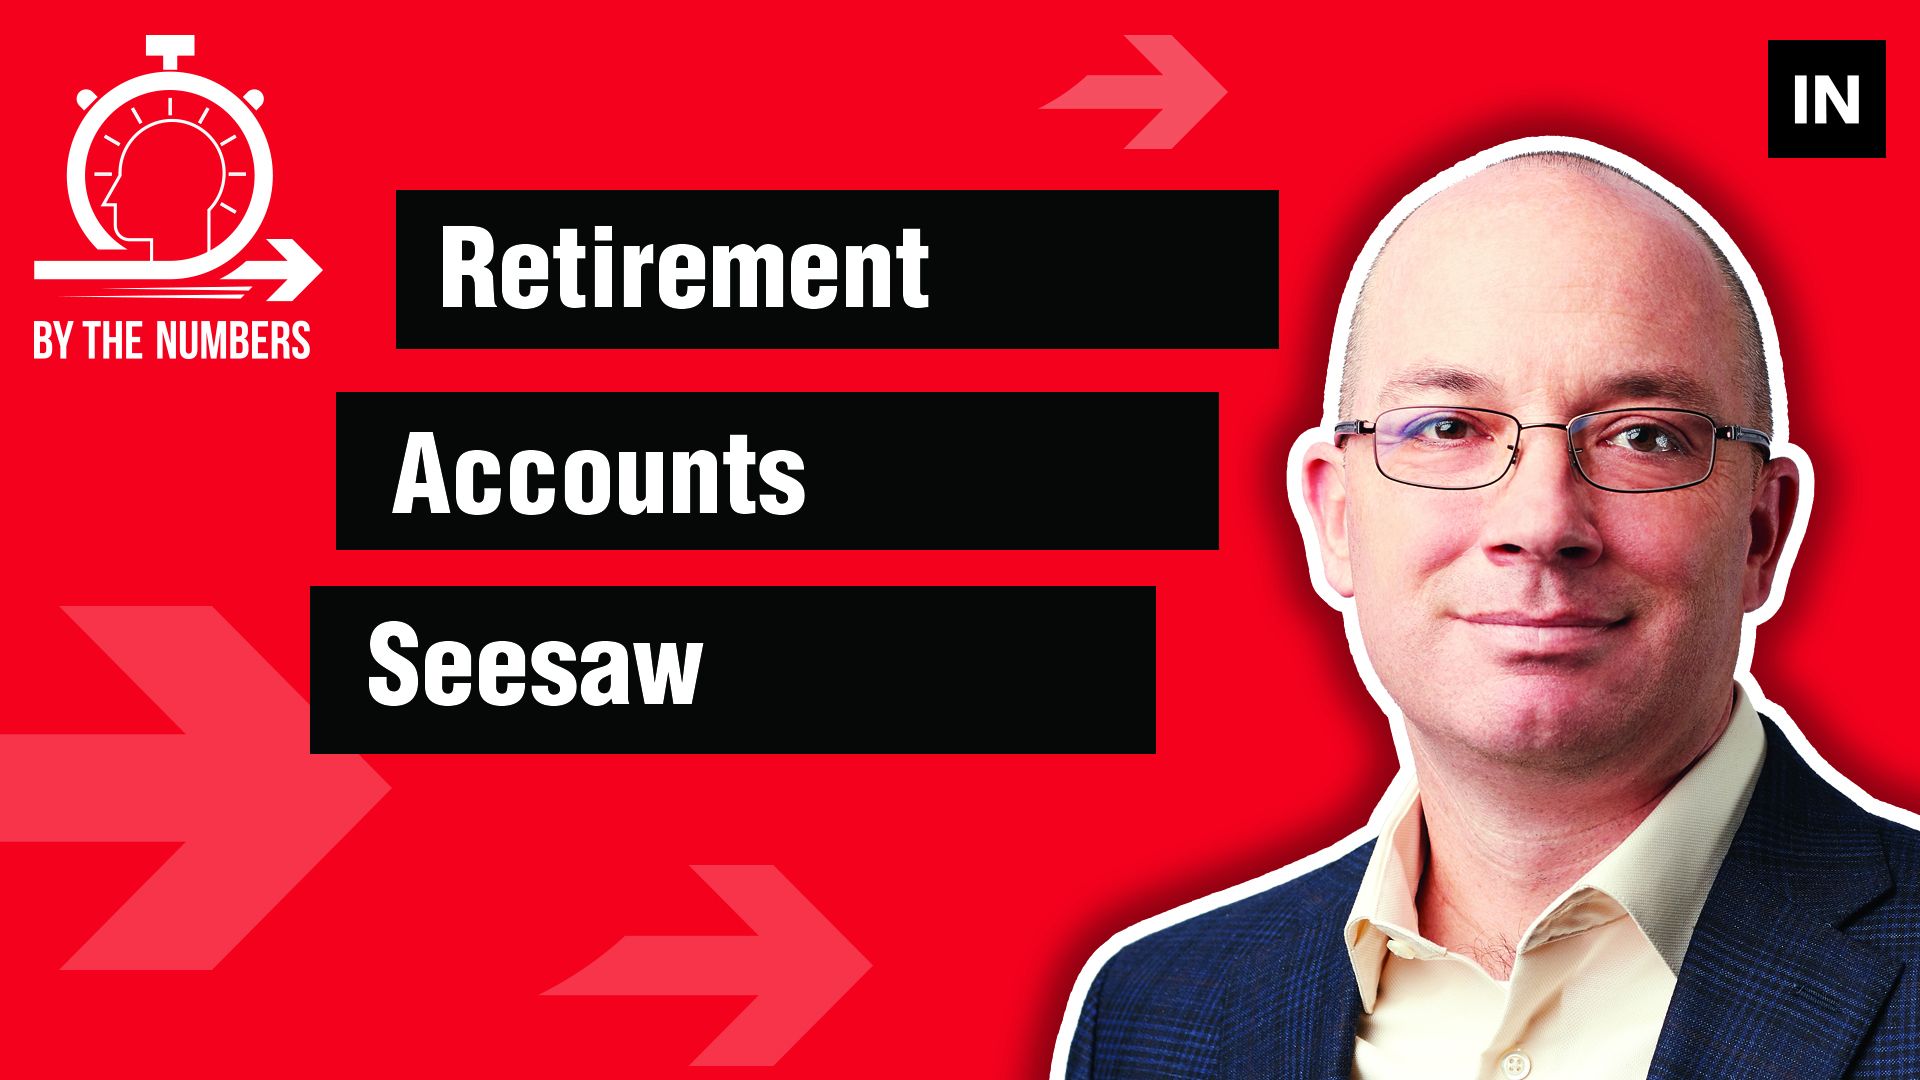 By the Numbers: Retirement accounts seesaw